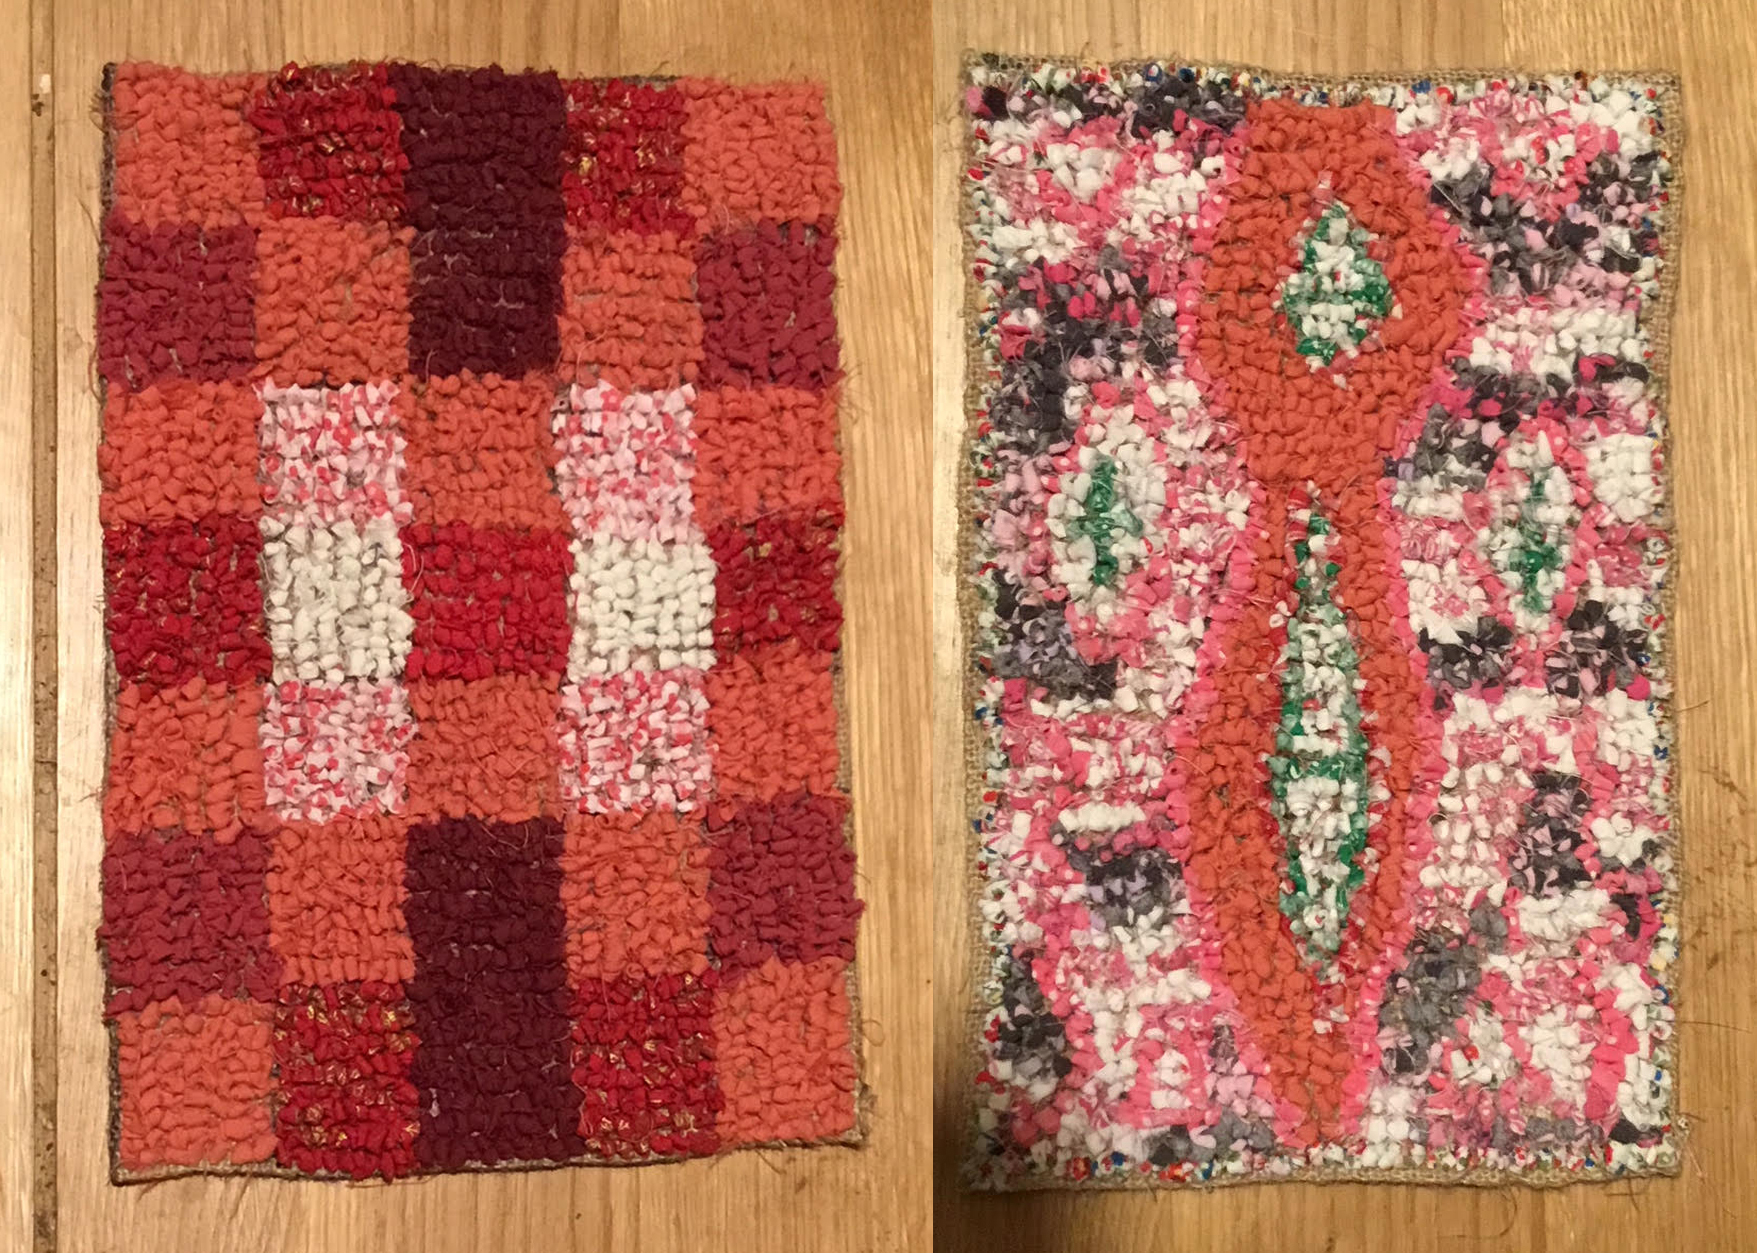 Rag rug placemats in loopy rag rugging in oranges, reds and pink materials.